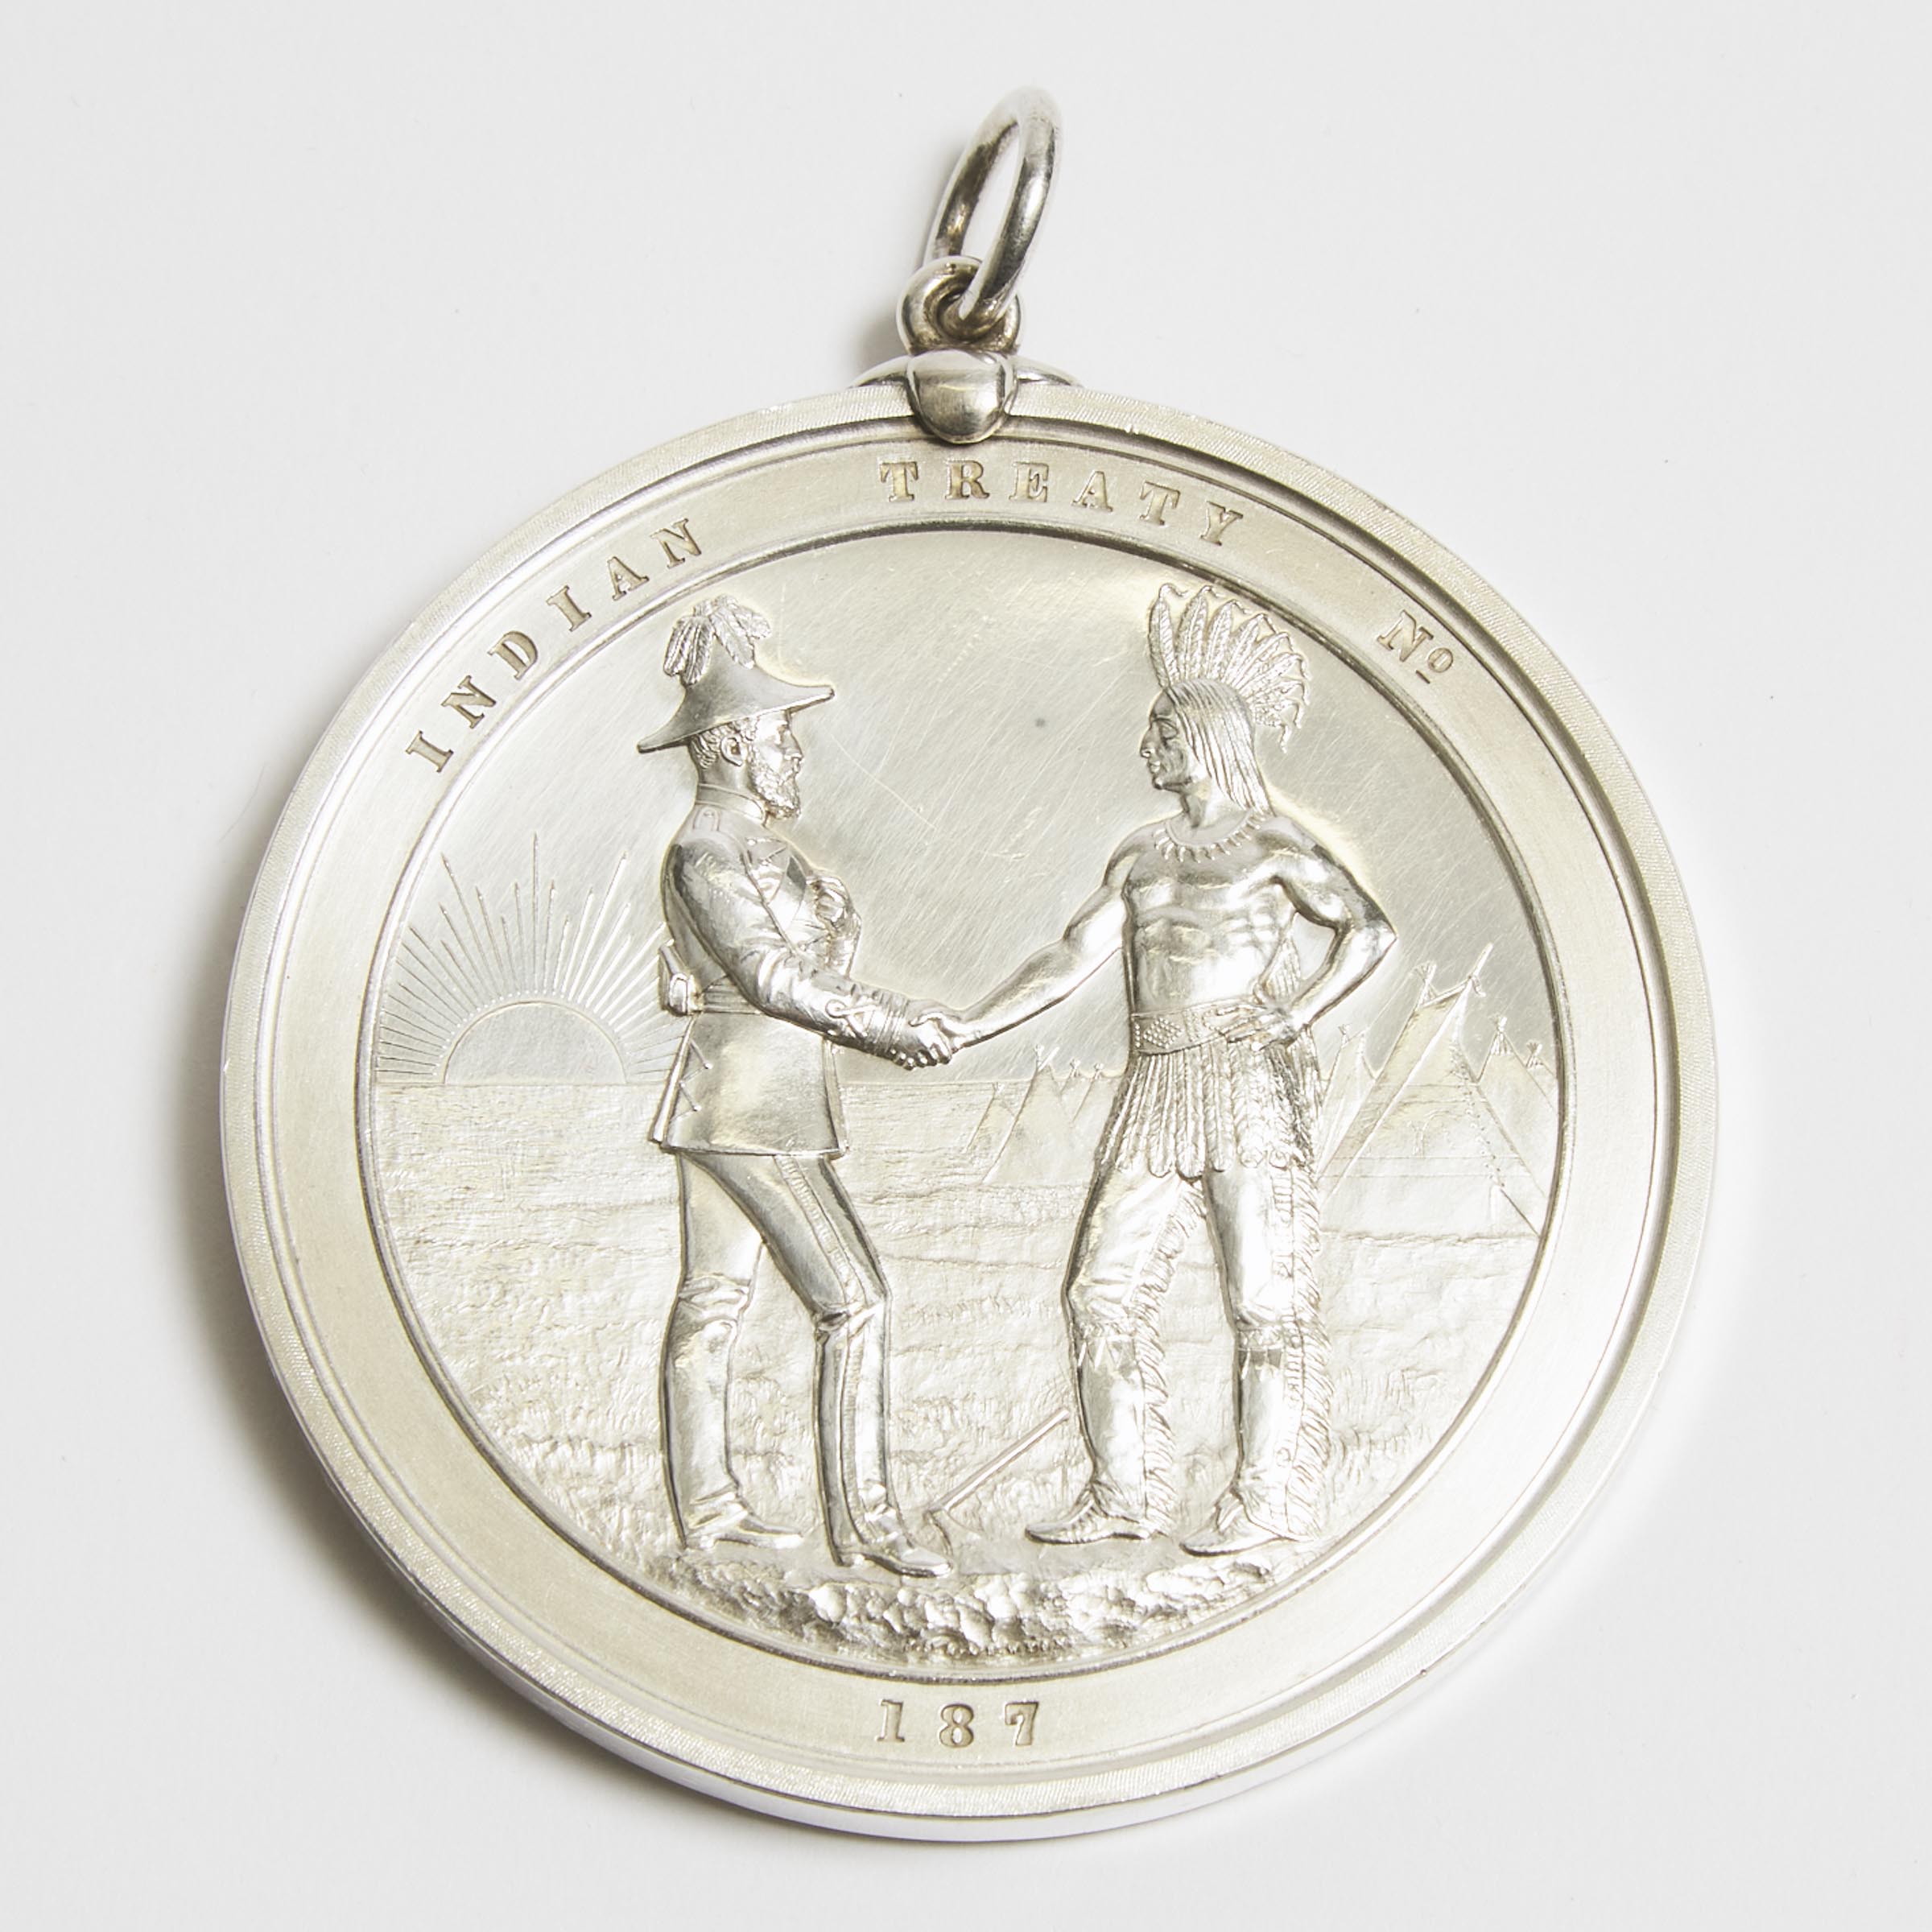 Canadian Indian Peace Treaty Silver Medal, Unissued, after 1870